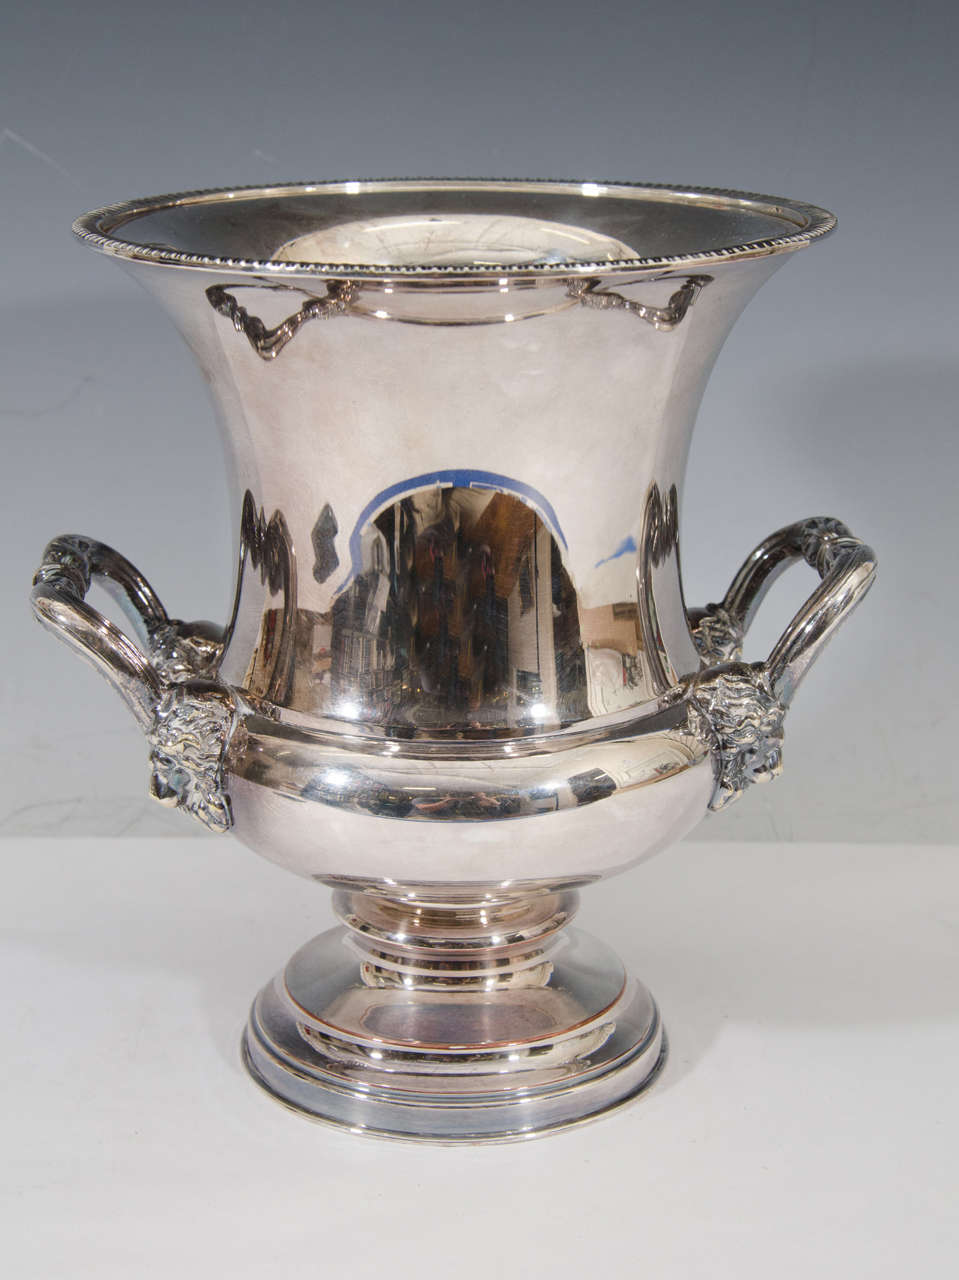 A vintage English silver plate ice bucket or champagne cooler with lion and elk design, circa 1940s.

The piece has its original removable liner.